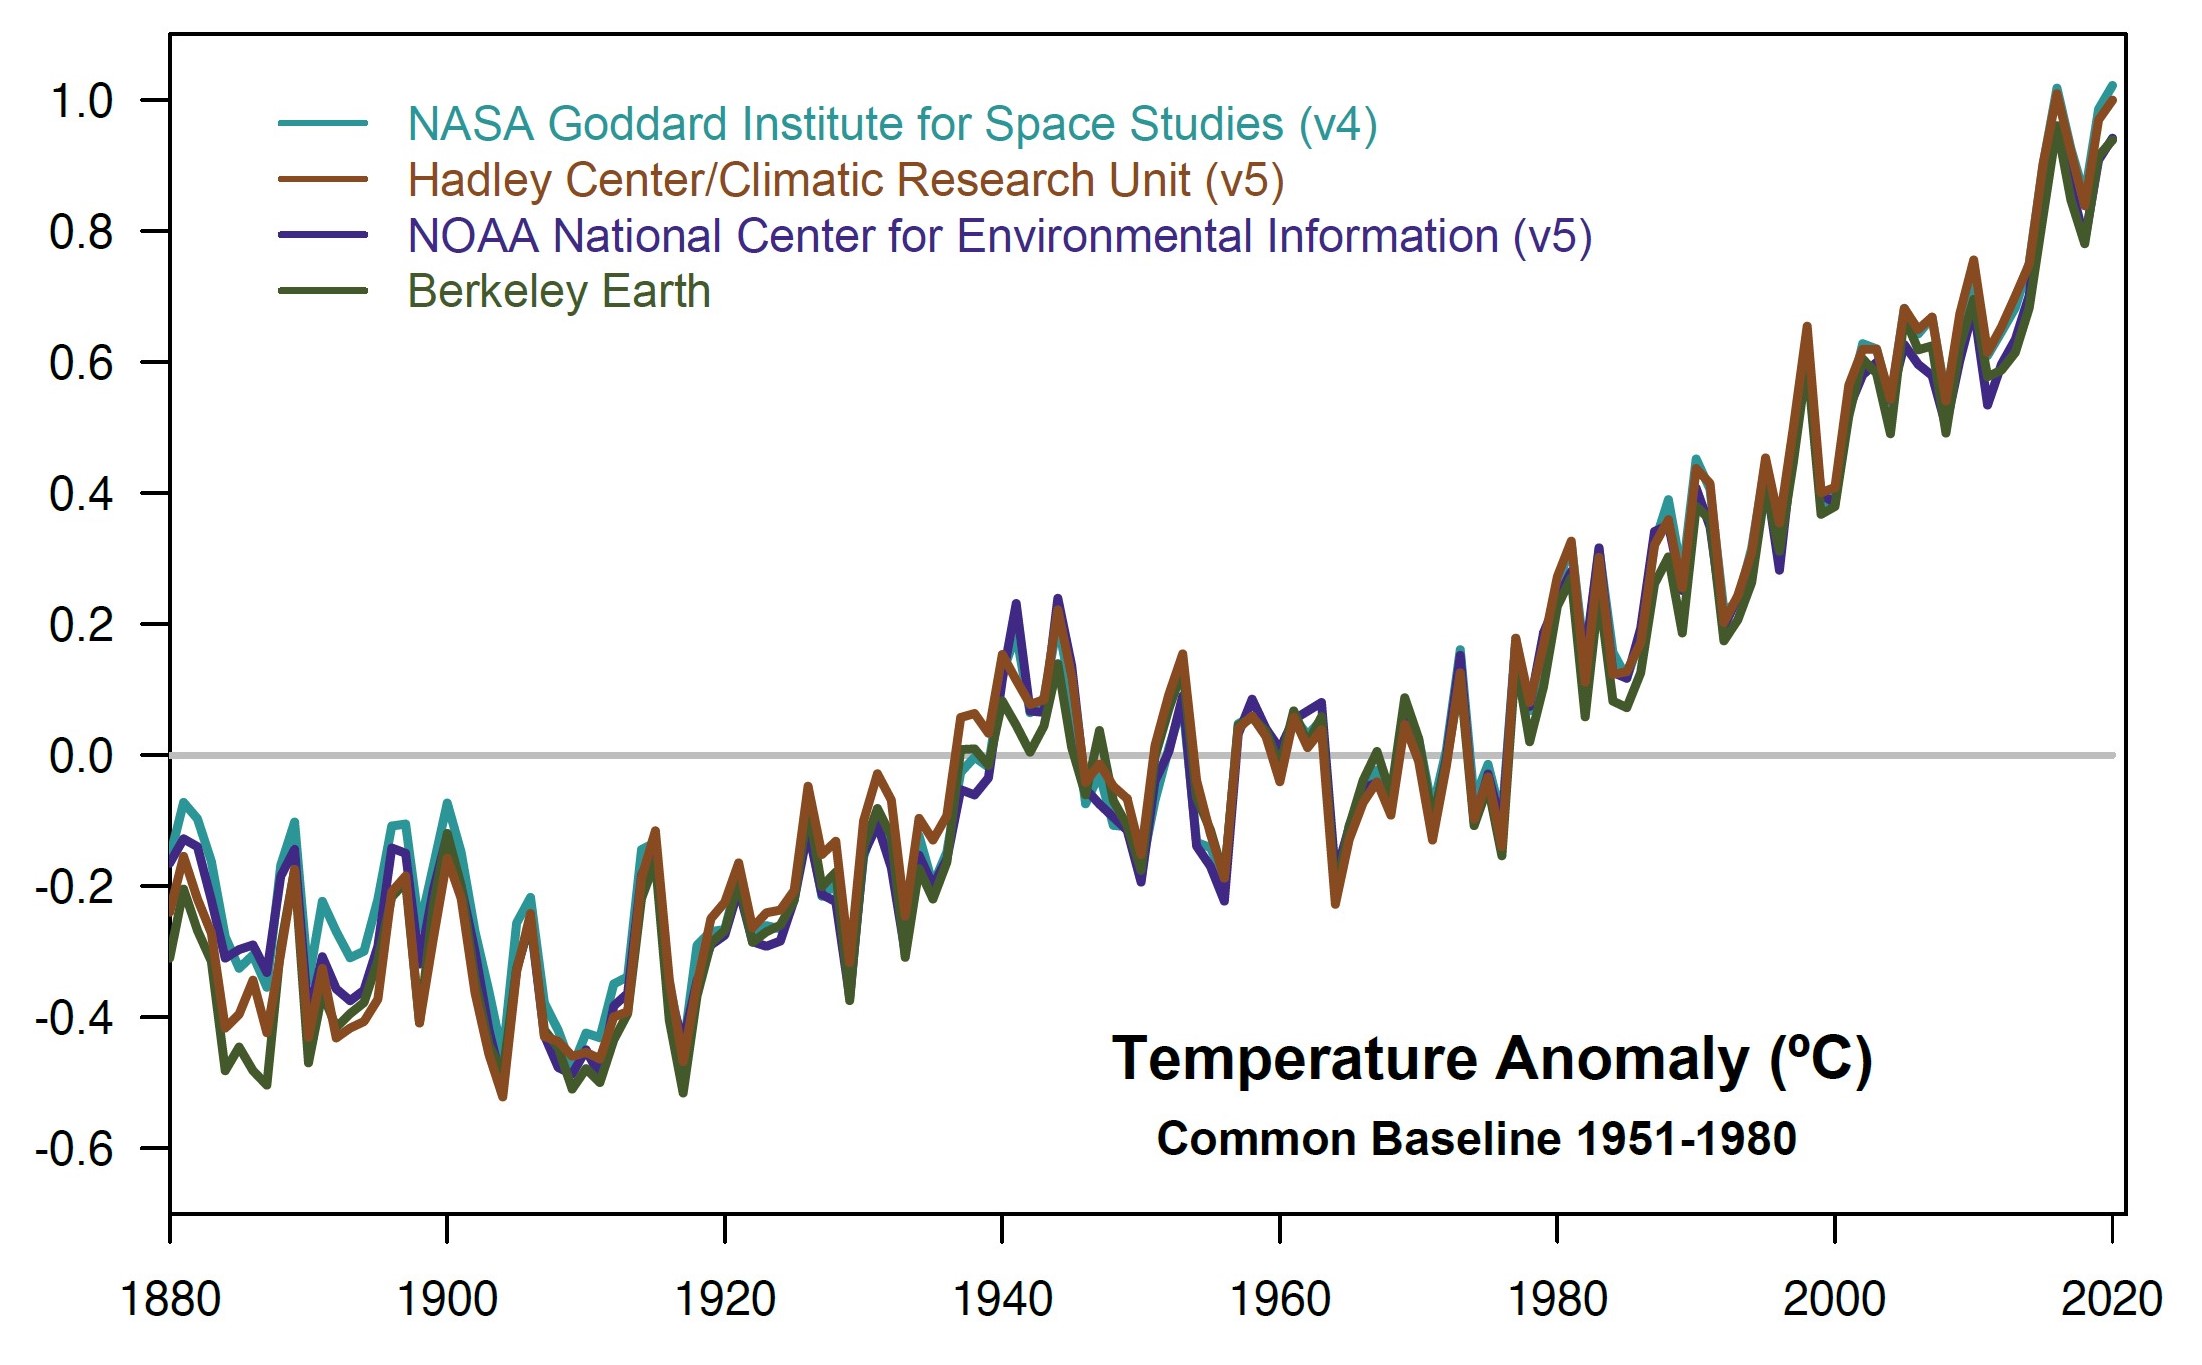 NASA temperature comparison chart, showing rising global temps with 2020 the hottest yethttps://www.nasa.gov/press-release/2020-tied-for-warmest-year-on-record-nasa-analysis-showshttps://www.nasa.gov/press-release/2020-tied-for-warmest-year-on-record-nasa-analysis-shows